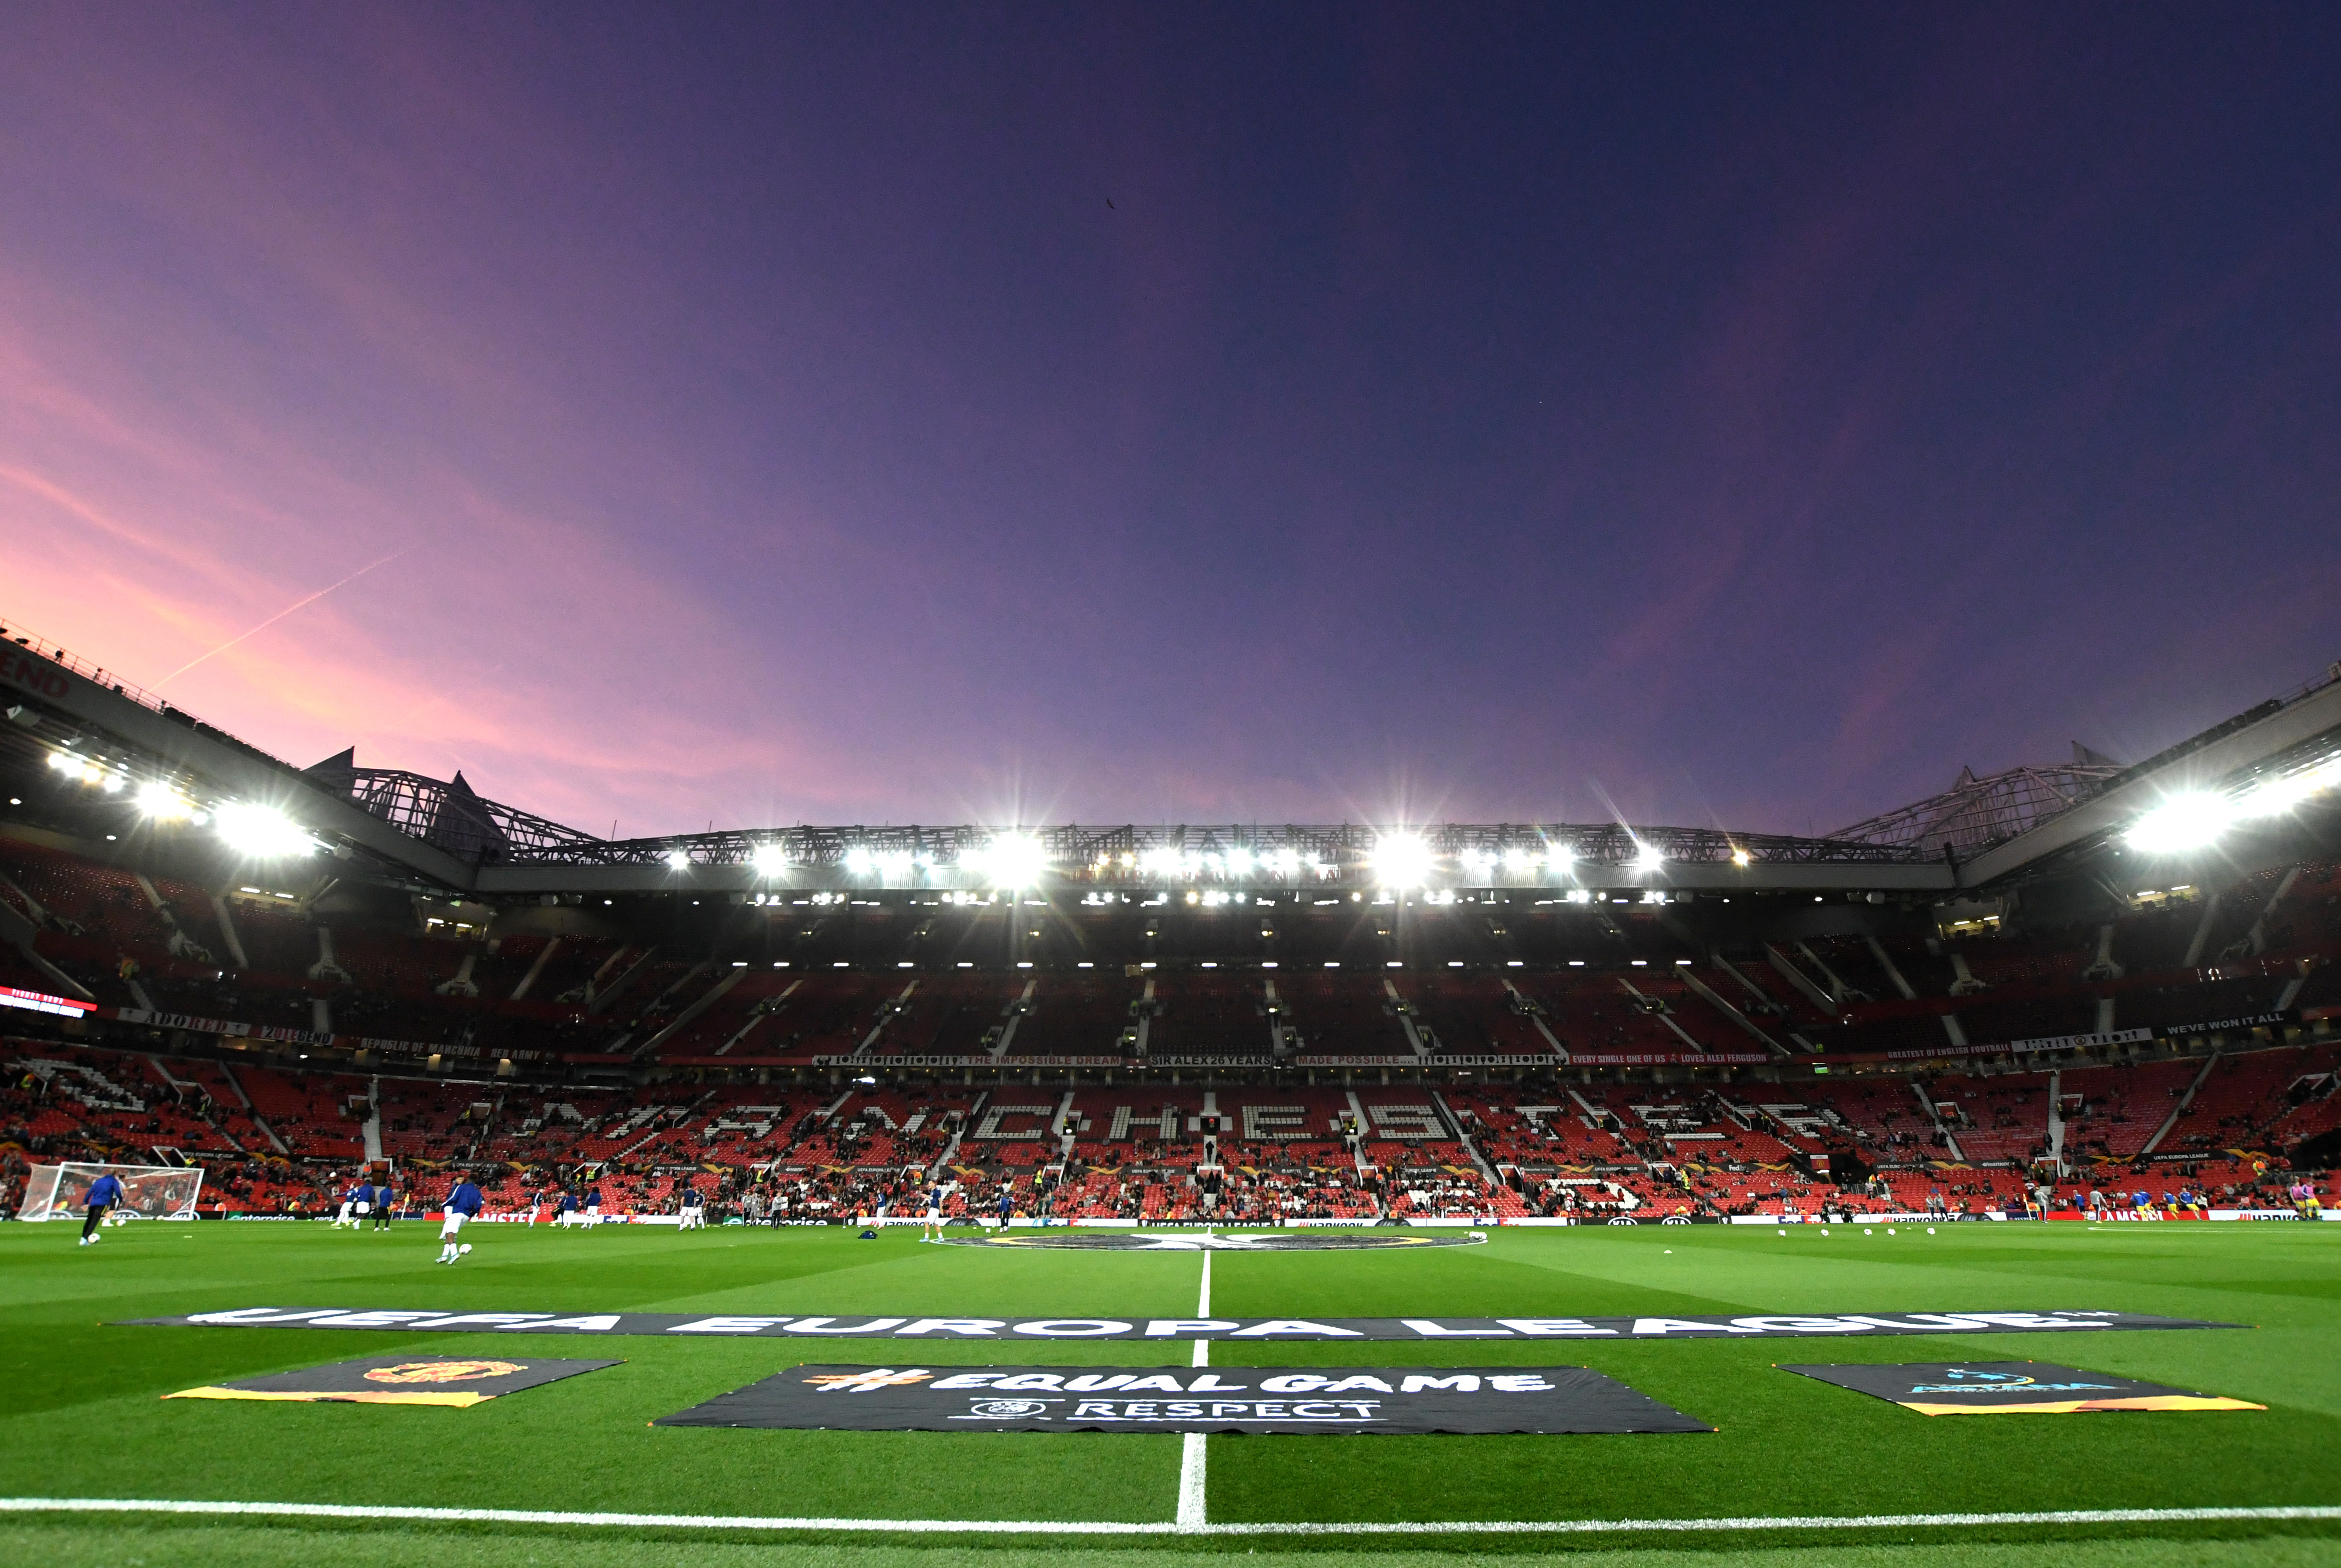 MANCHESTER, ENGLAND - SEPTEMBER 19: General view inside the stadium prior to the UEFA Europa League group L match between Manchester United and FK Astana at Old Trafford on September 19, 2019 in Manchester, United Kingdom. (Photo by George Wood/Getty Images)